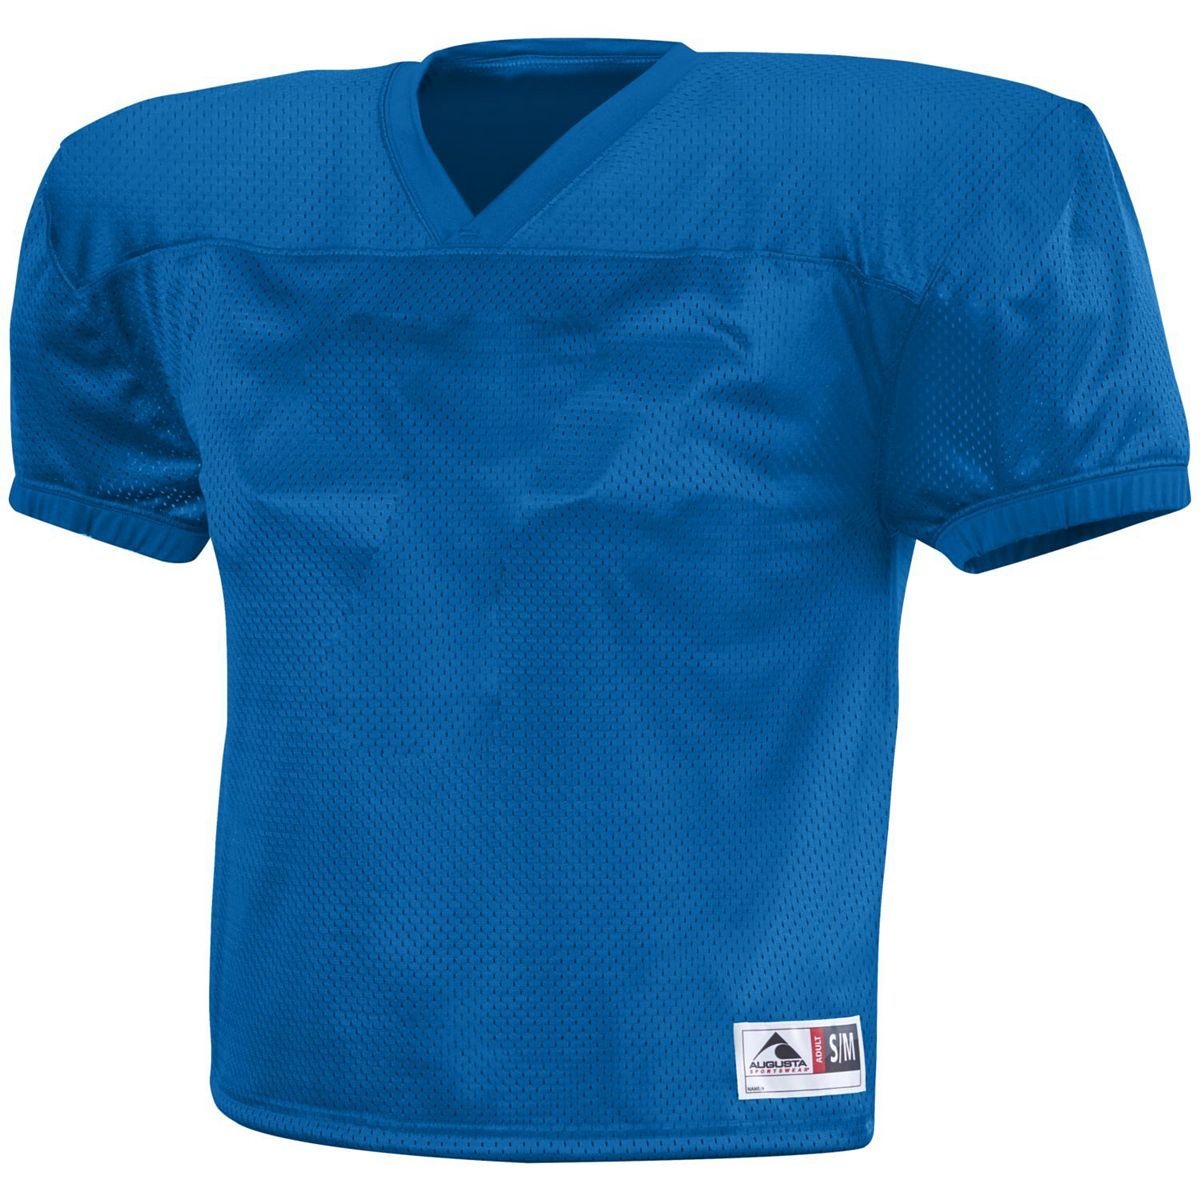 Augusta Sportswear Dash Practice Jersey in Royal  -Part of the Adult, Adult-Jersey, Augusta-Products, Football, Shirts, All-Sports, All-Sports-1 product lines at KanaleyCreations.com